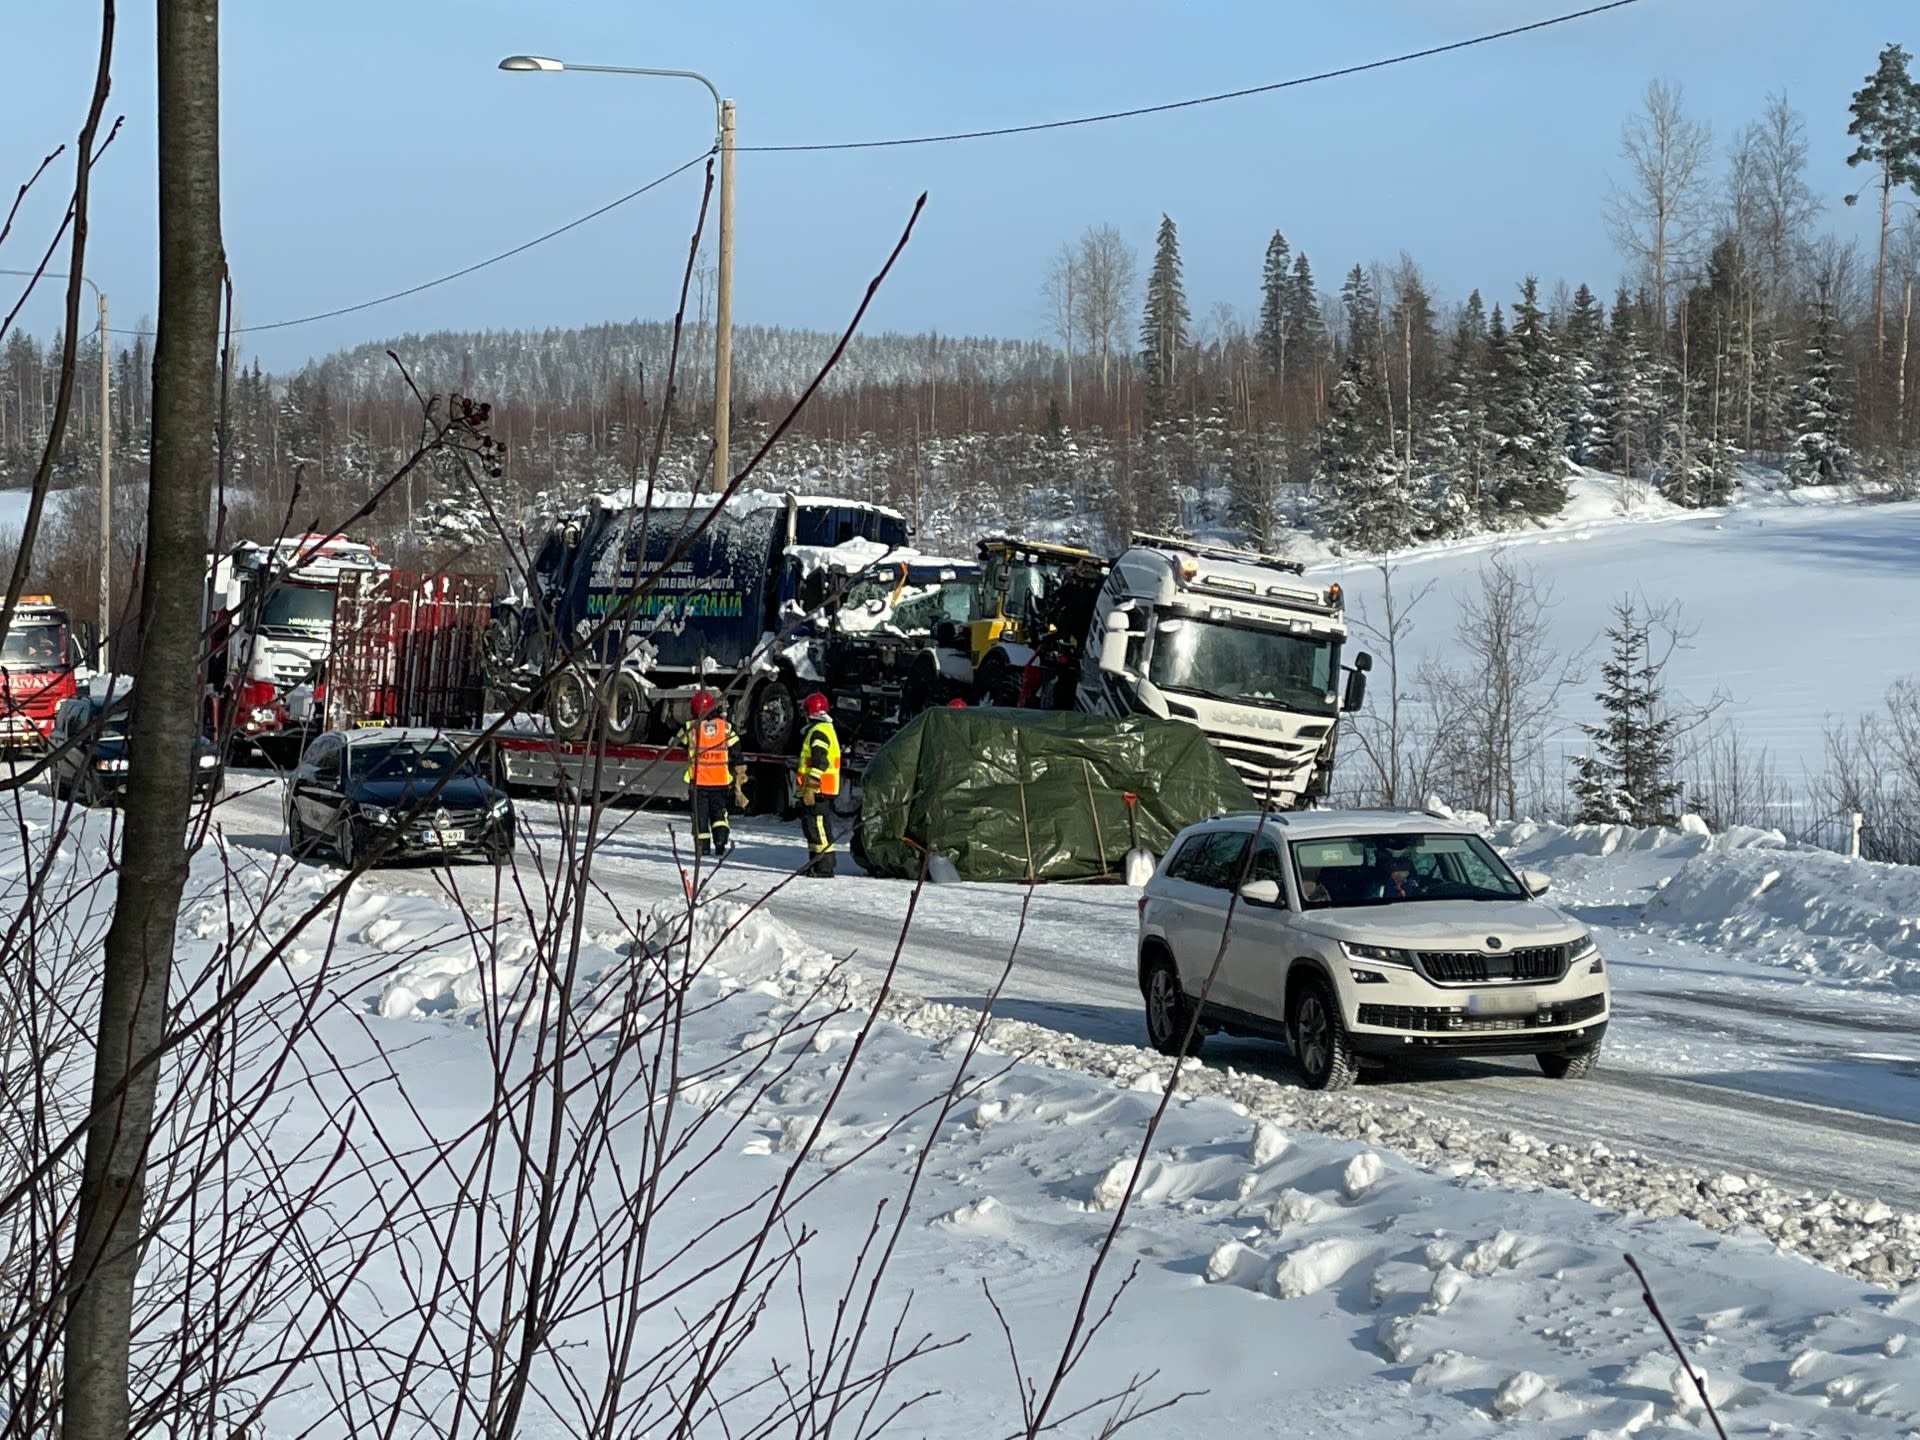 The victims of the fatal accident in Jyväskylä were university students